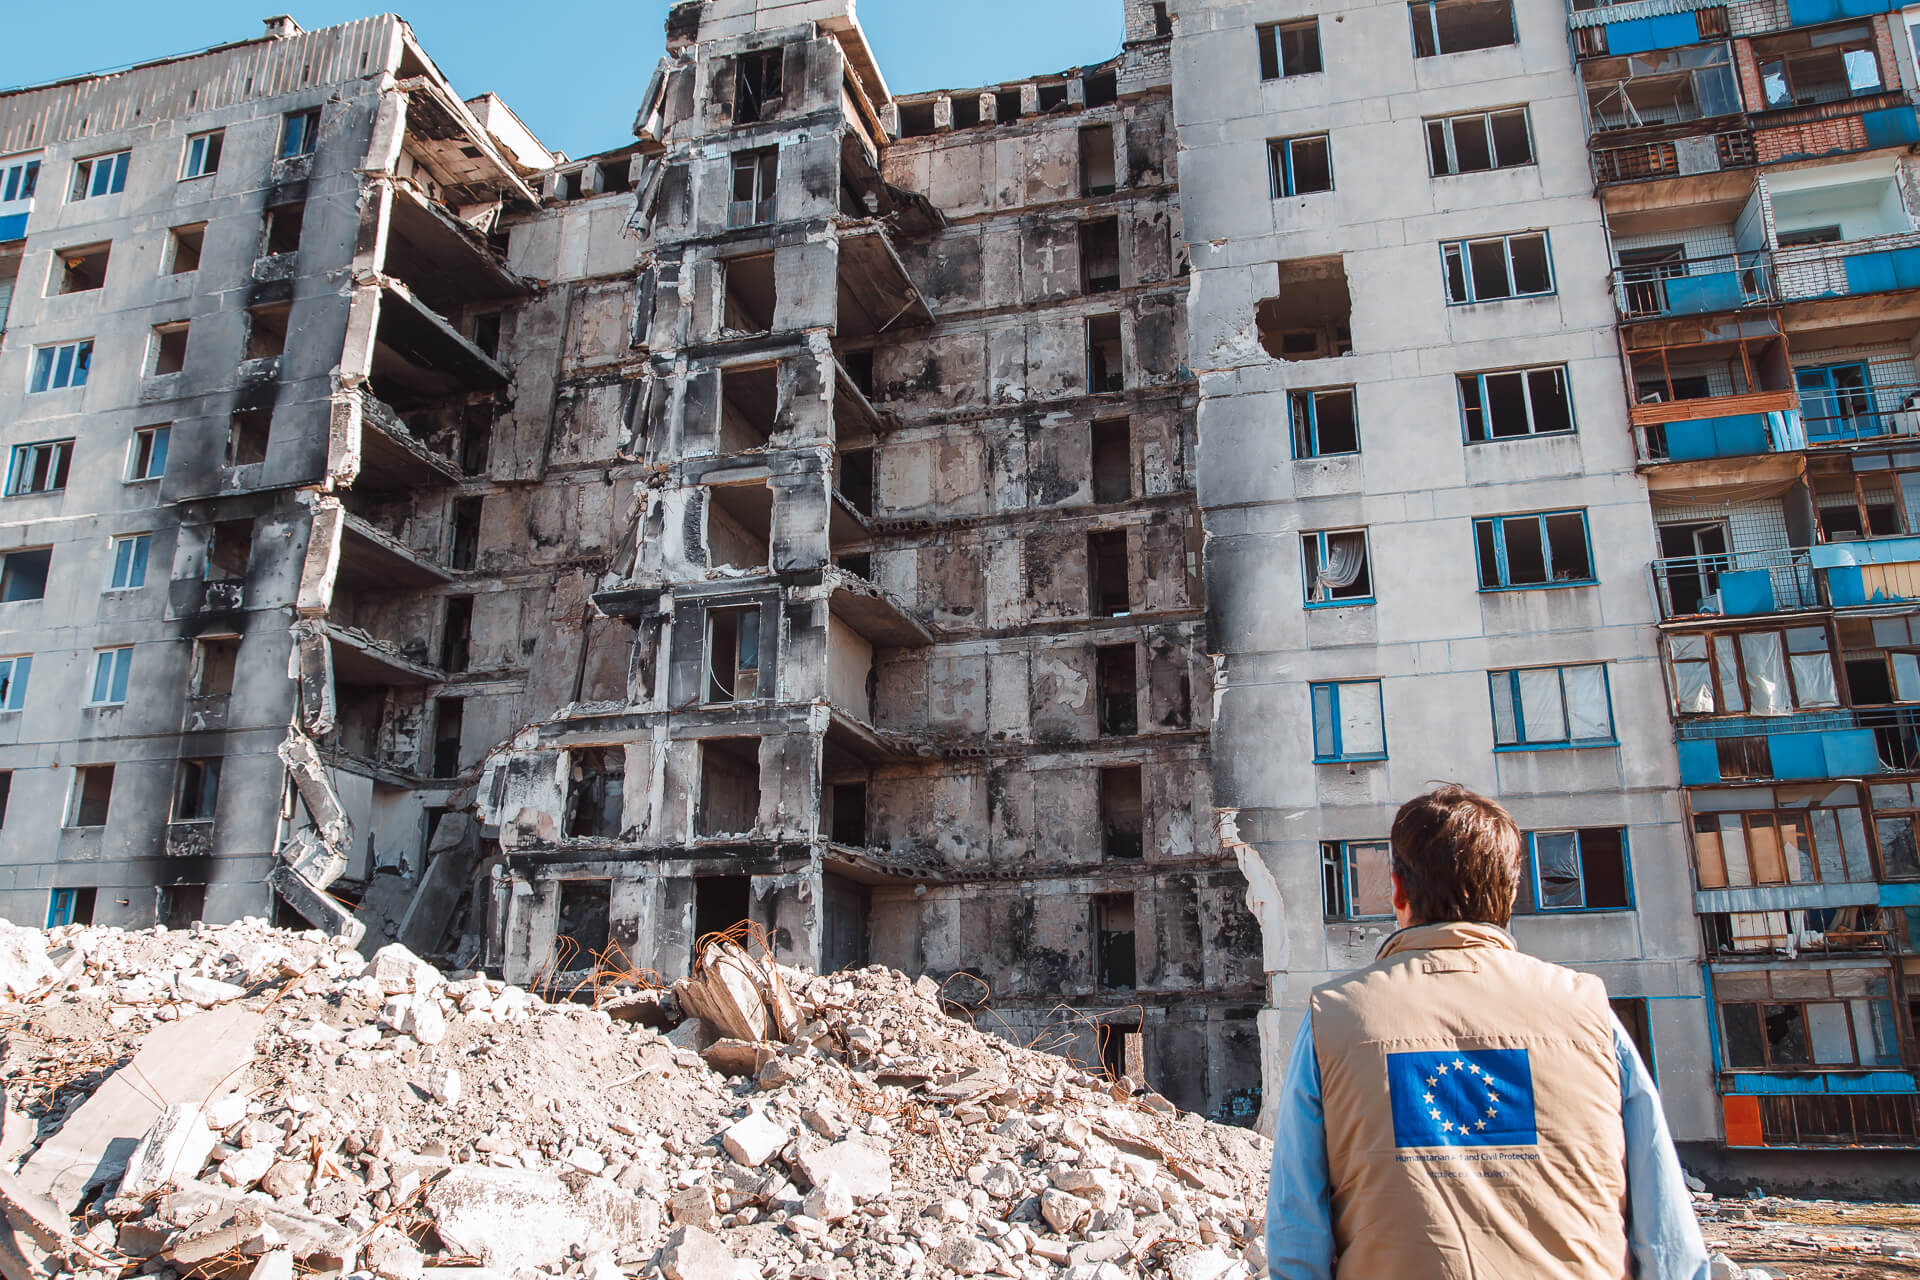 EU Civil Protection and Humanitarian Aid in eastern Ukraine, 2015. © EU Civil Protection and Humanitarian Aid / Flickr